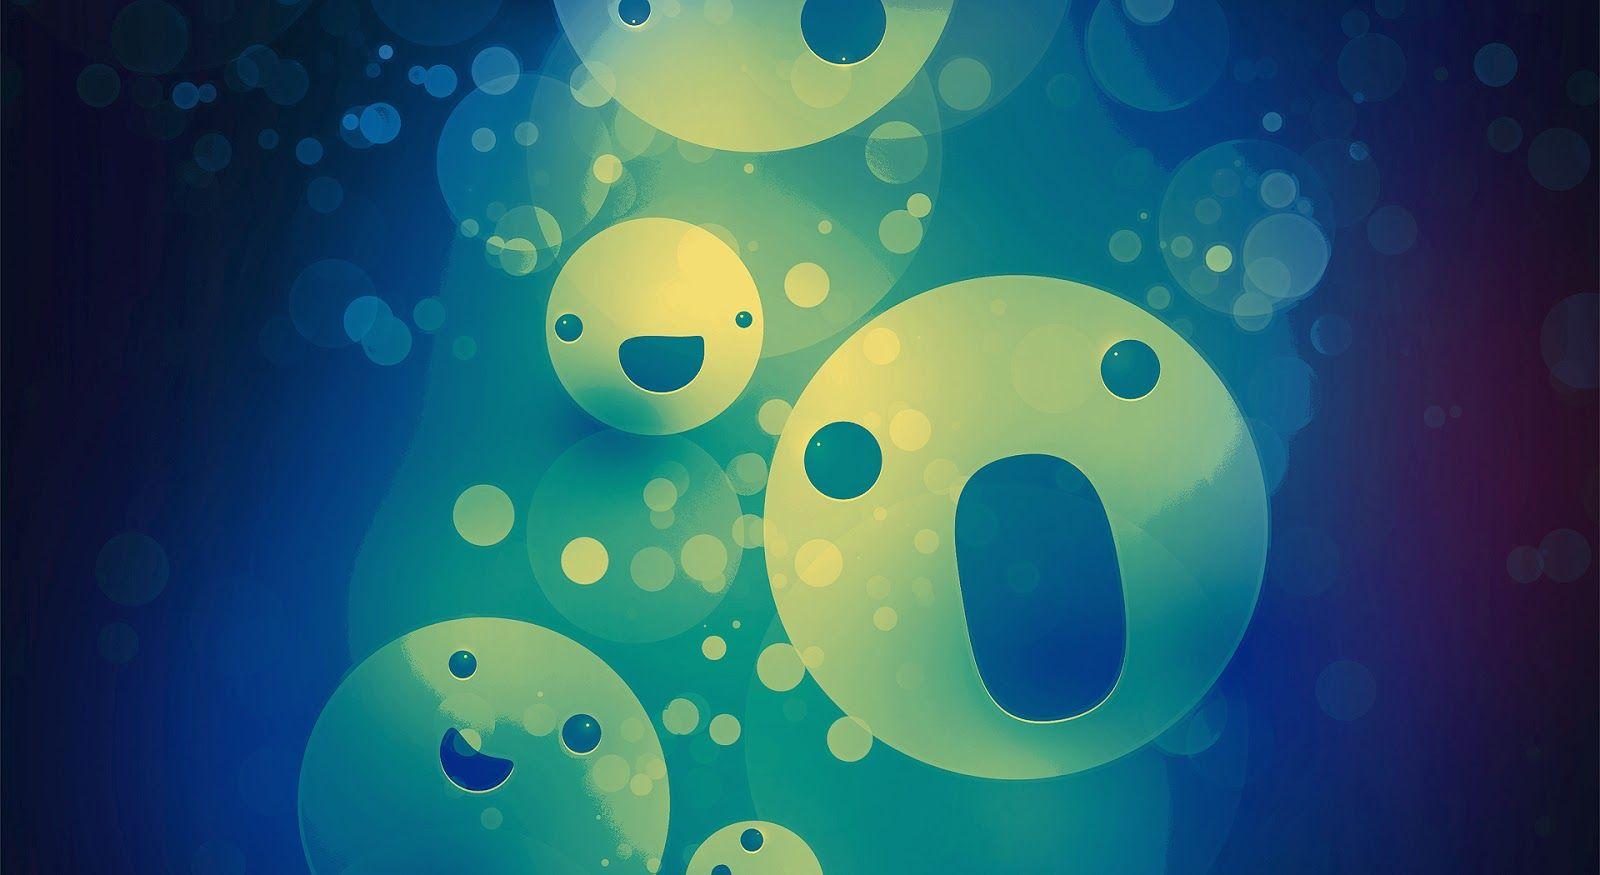 Cute smiley abstract graphics design #wallpaper